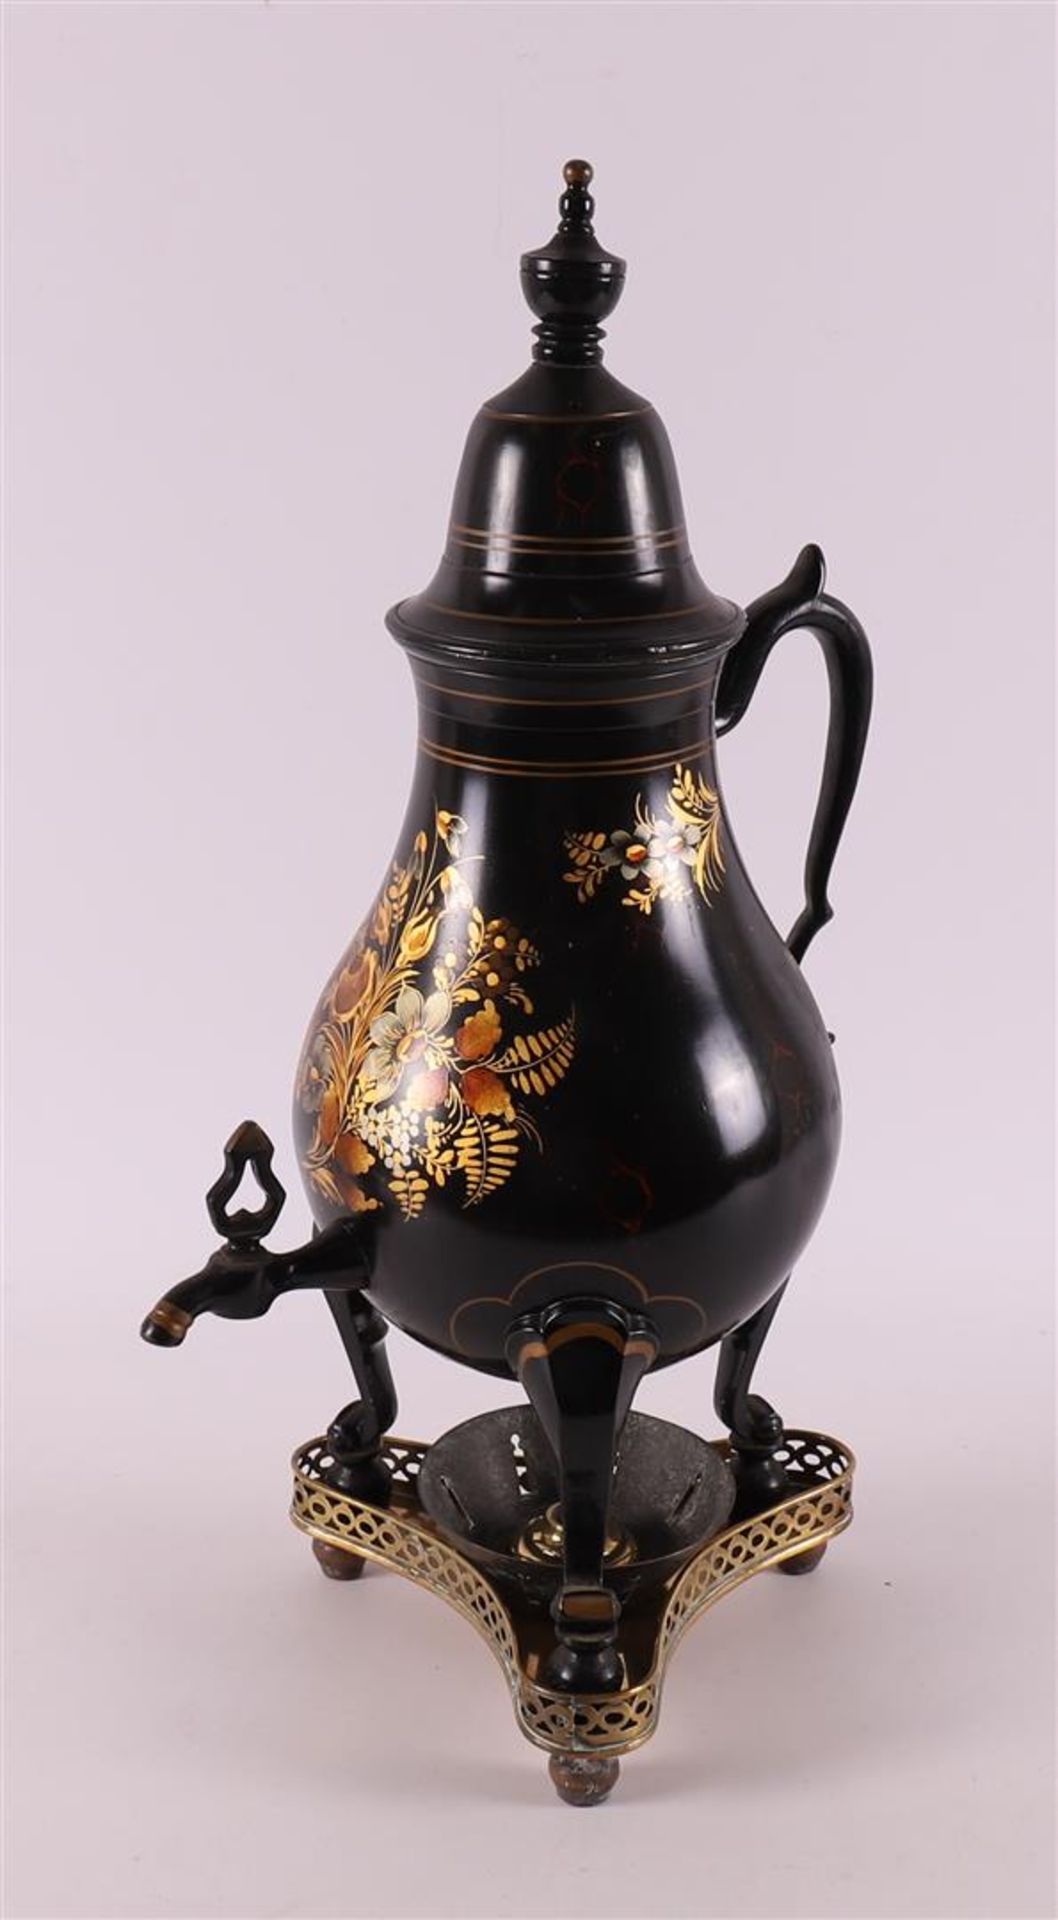 A pear-shaped black lacquered pewter tap jug, second half of the 19th century.